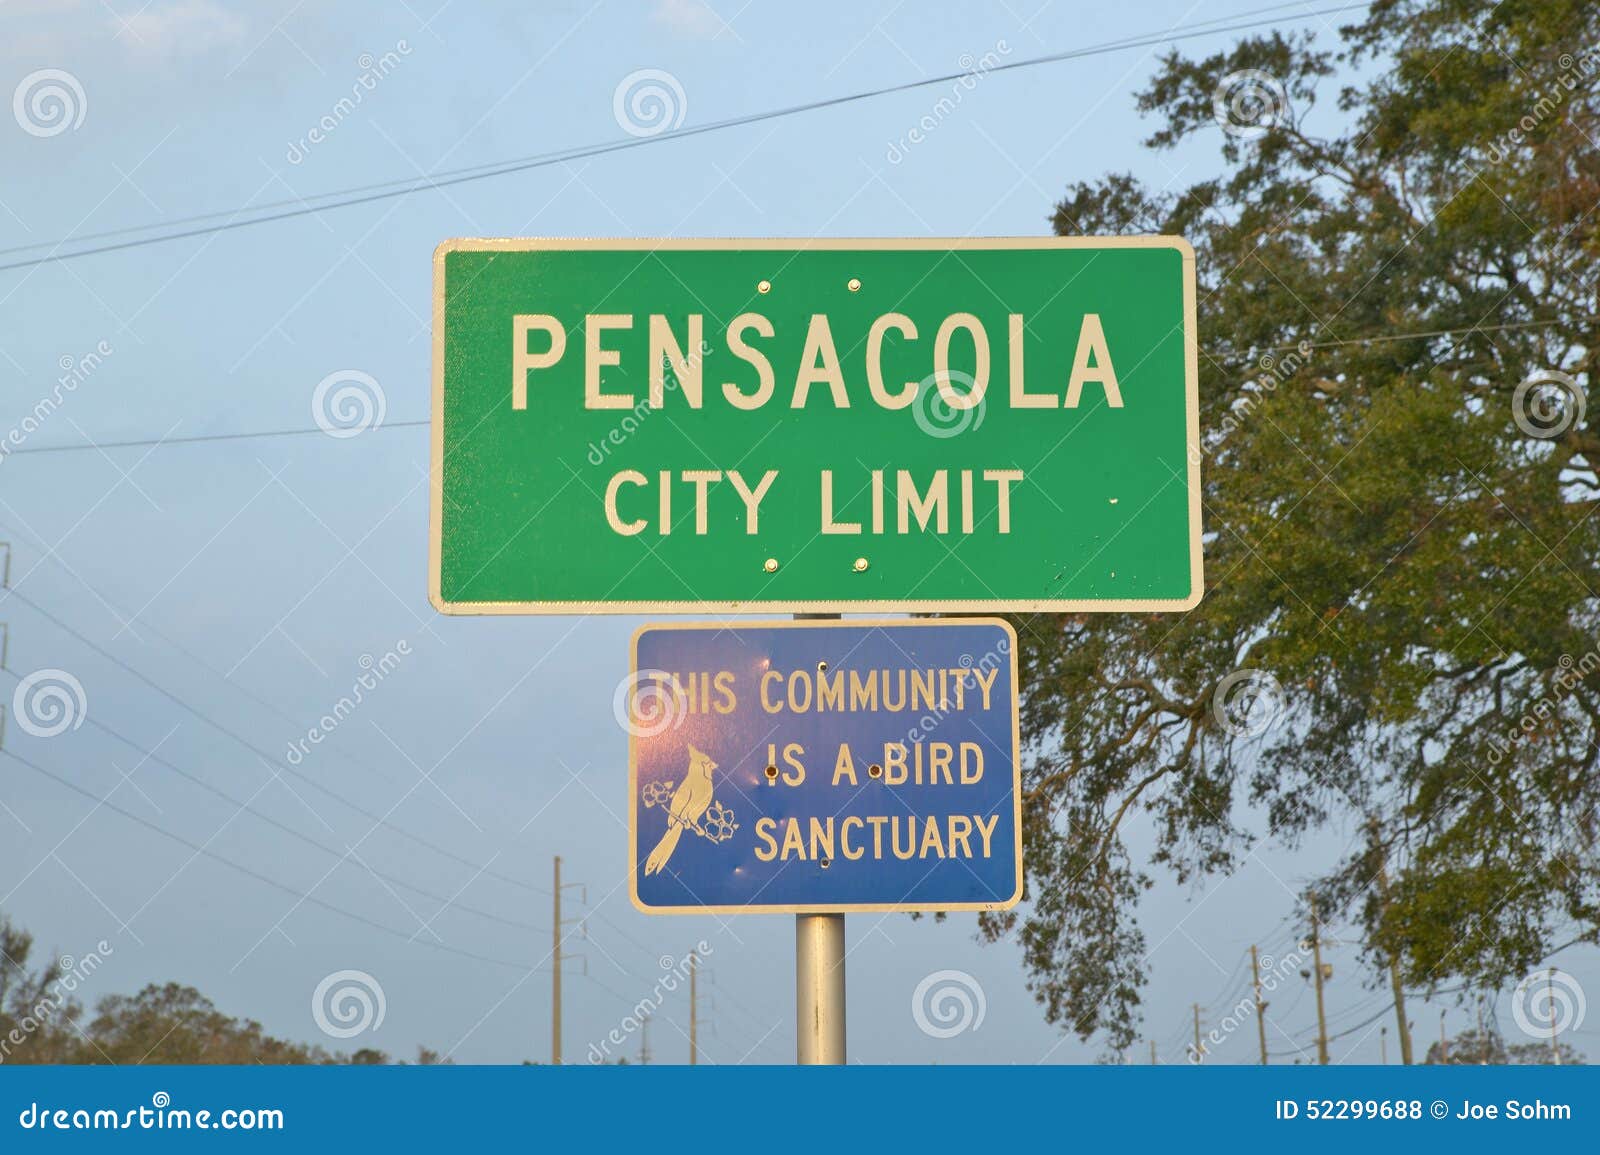 welcome-to-pensacola-florida-home-hurricane-ivan-fourth-worst-natural-disaster-american-history-52299688.jpg